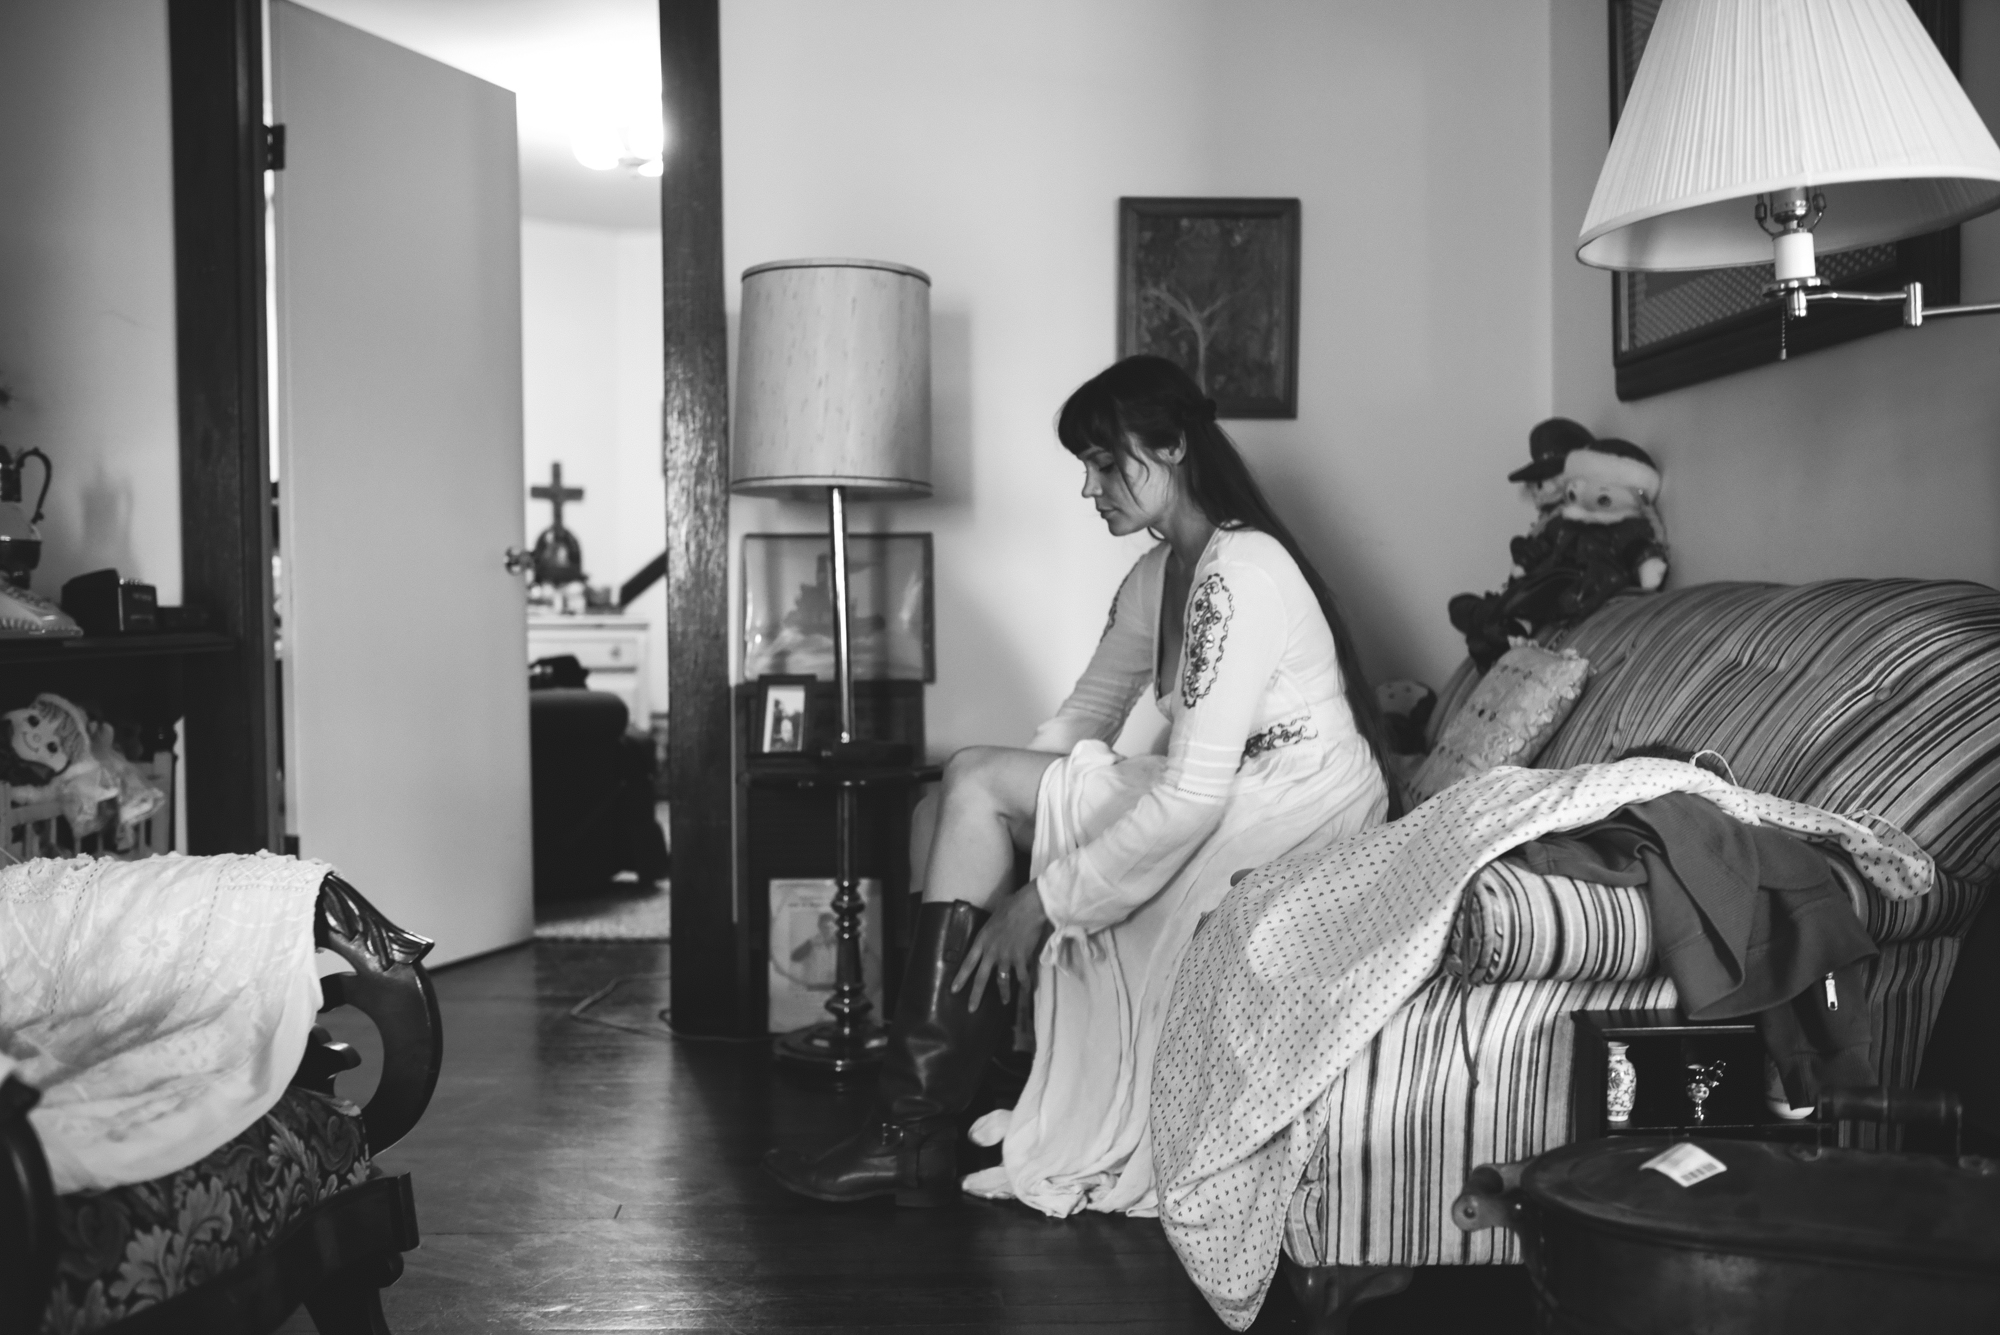  Mountains, Outdoors, Rustic, West Virginia, Maryland Wedding Photographer, DIY, Casual, Bride getting ready before ceremony, Bride wearing cowboy boots, Black and White Photos 